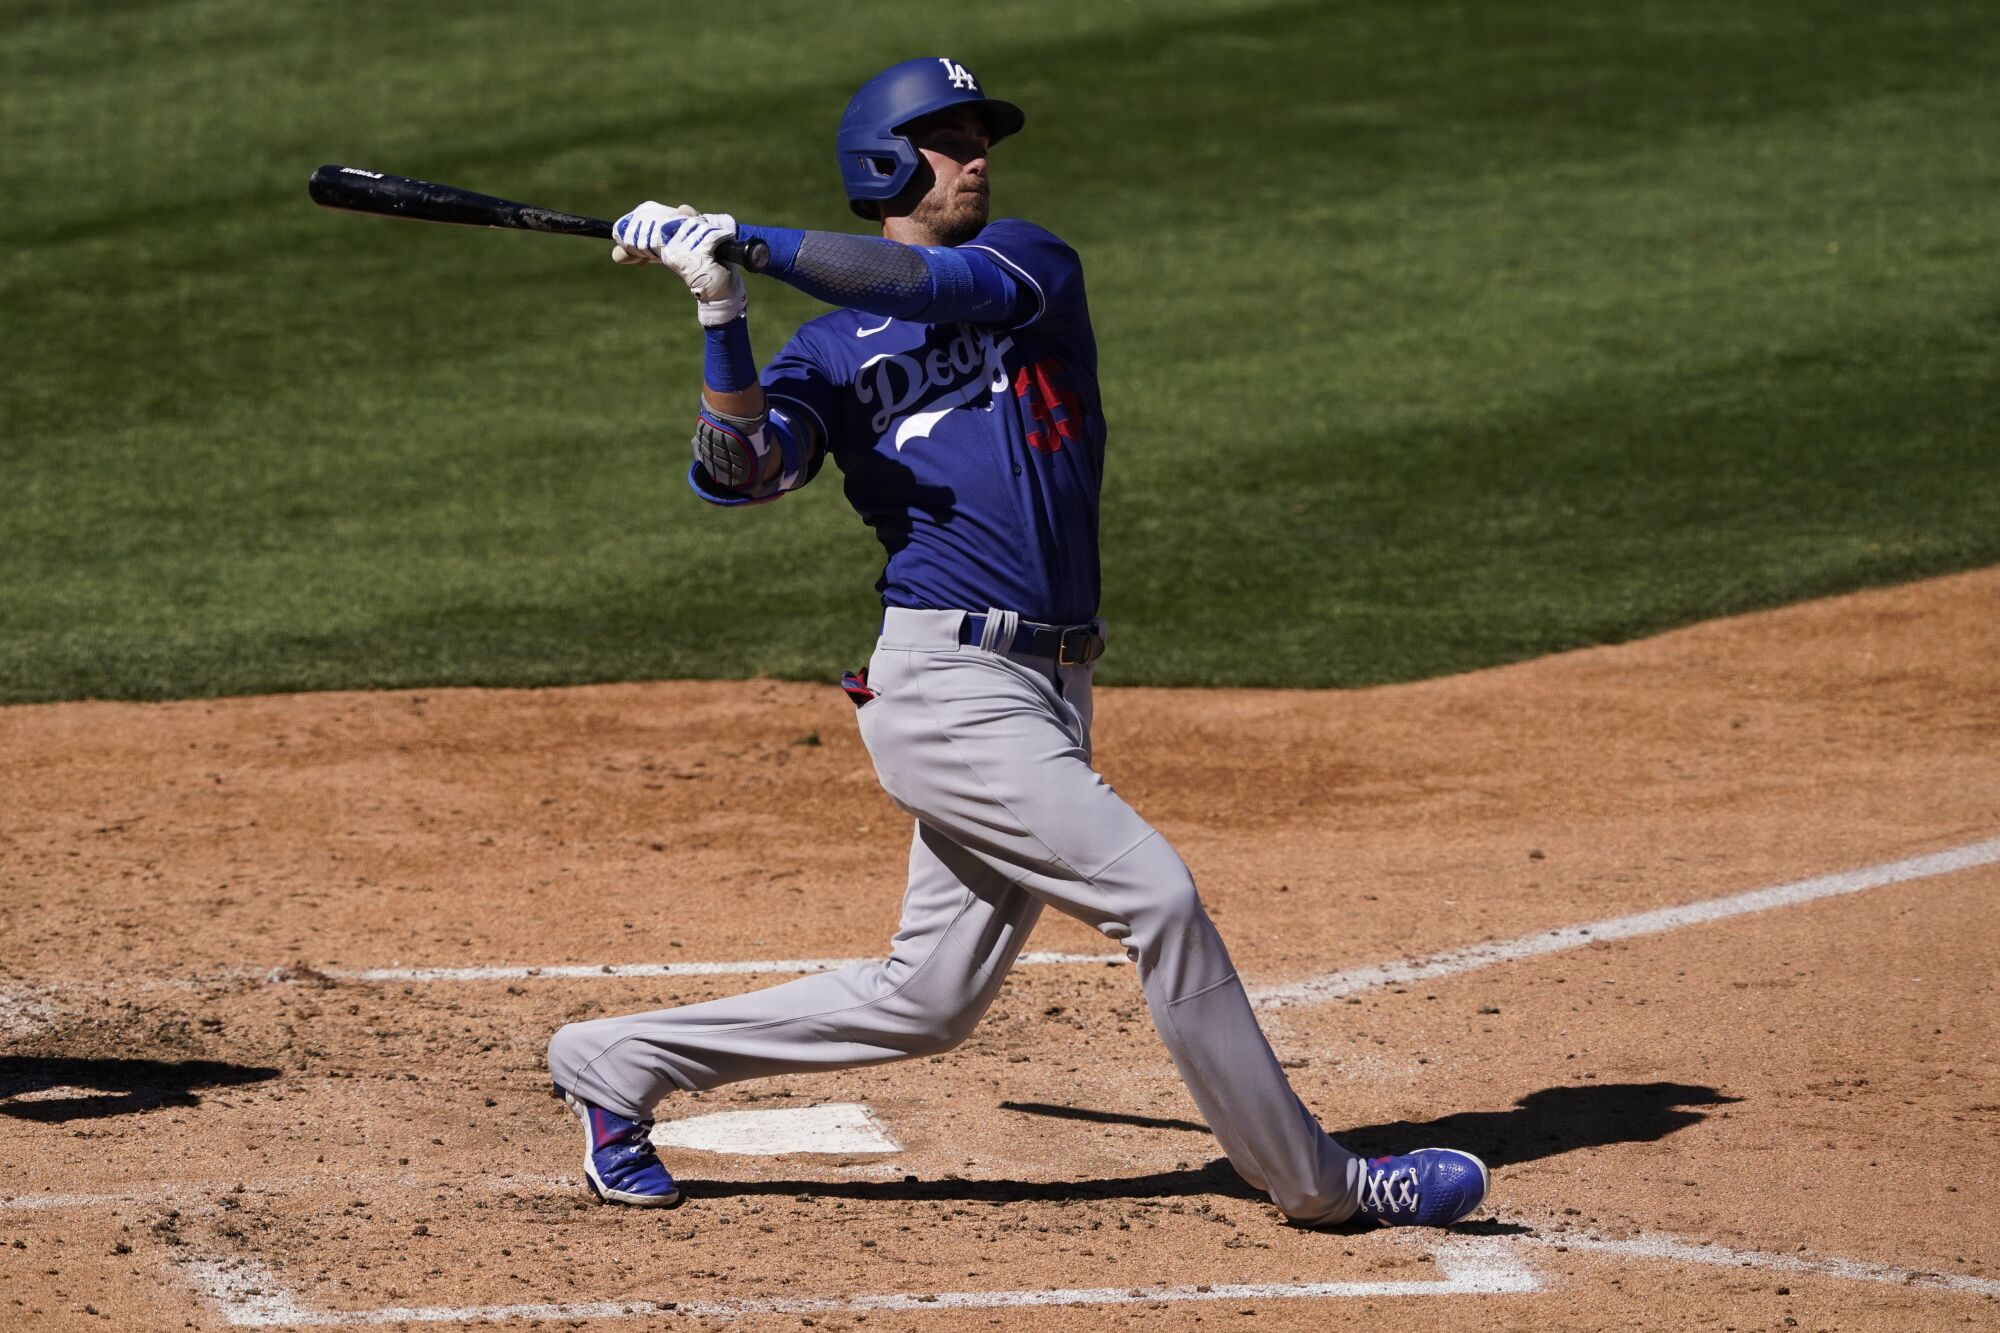 Dodgers center fielder Cody Bellinger bats against the Colorado Rockies in a spring training game.